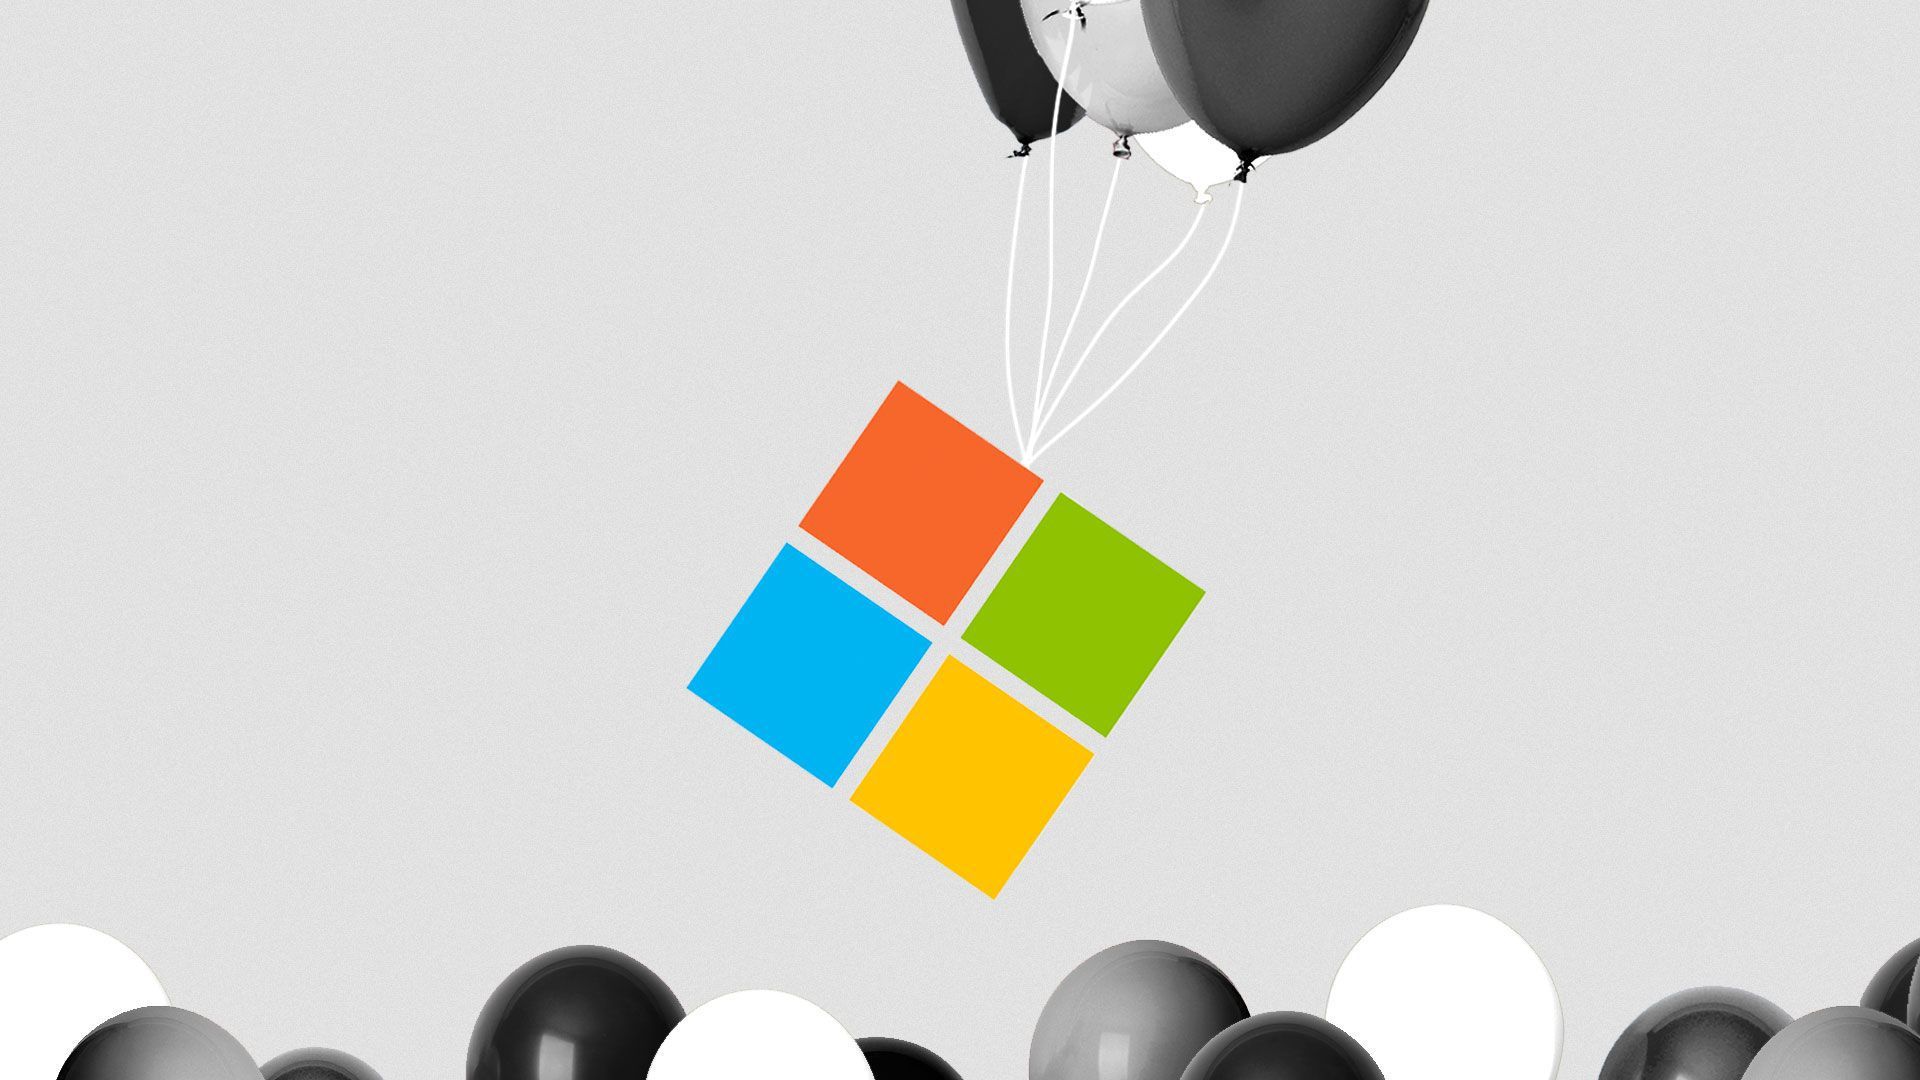 An image of the Microsoft logo being lifted by balloons.